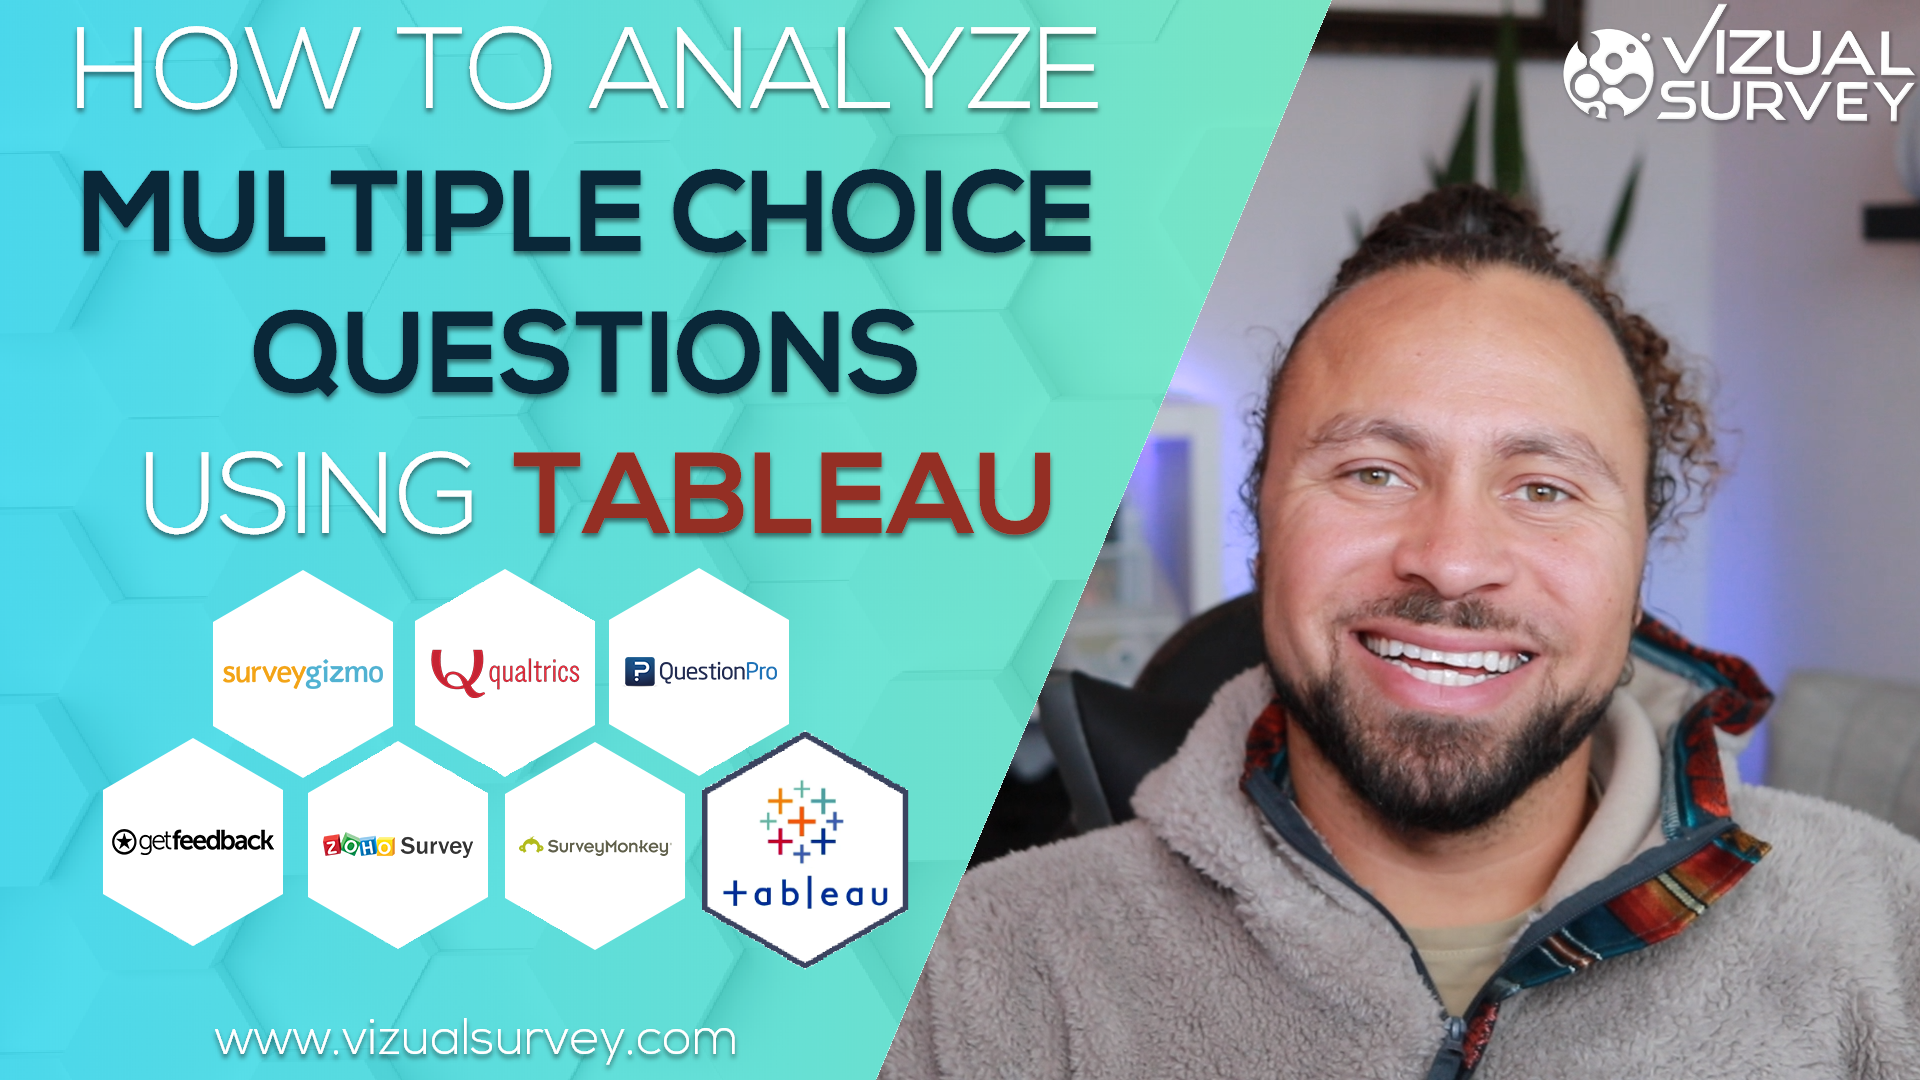 How to Analyze Multiple Choice Questions Using Tableau | Analyzing Survey Data with Tableau